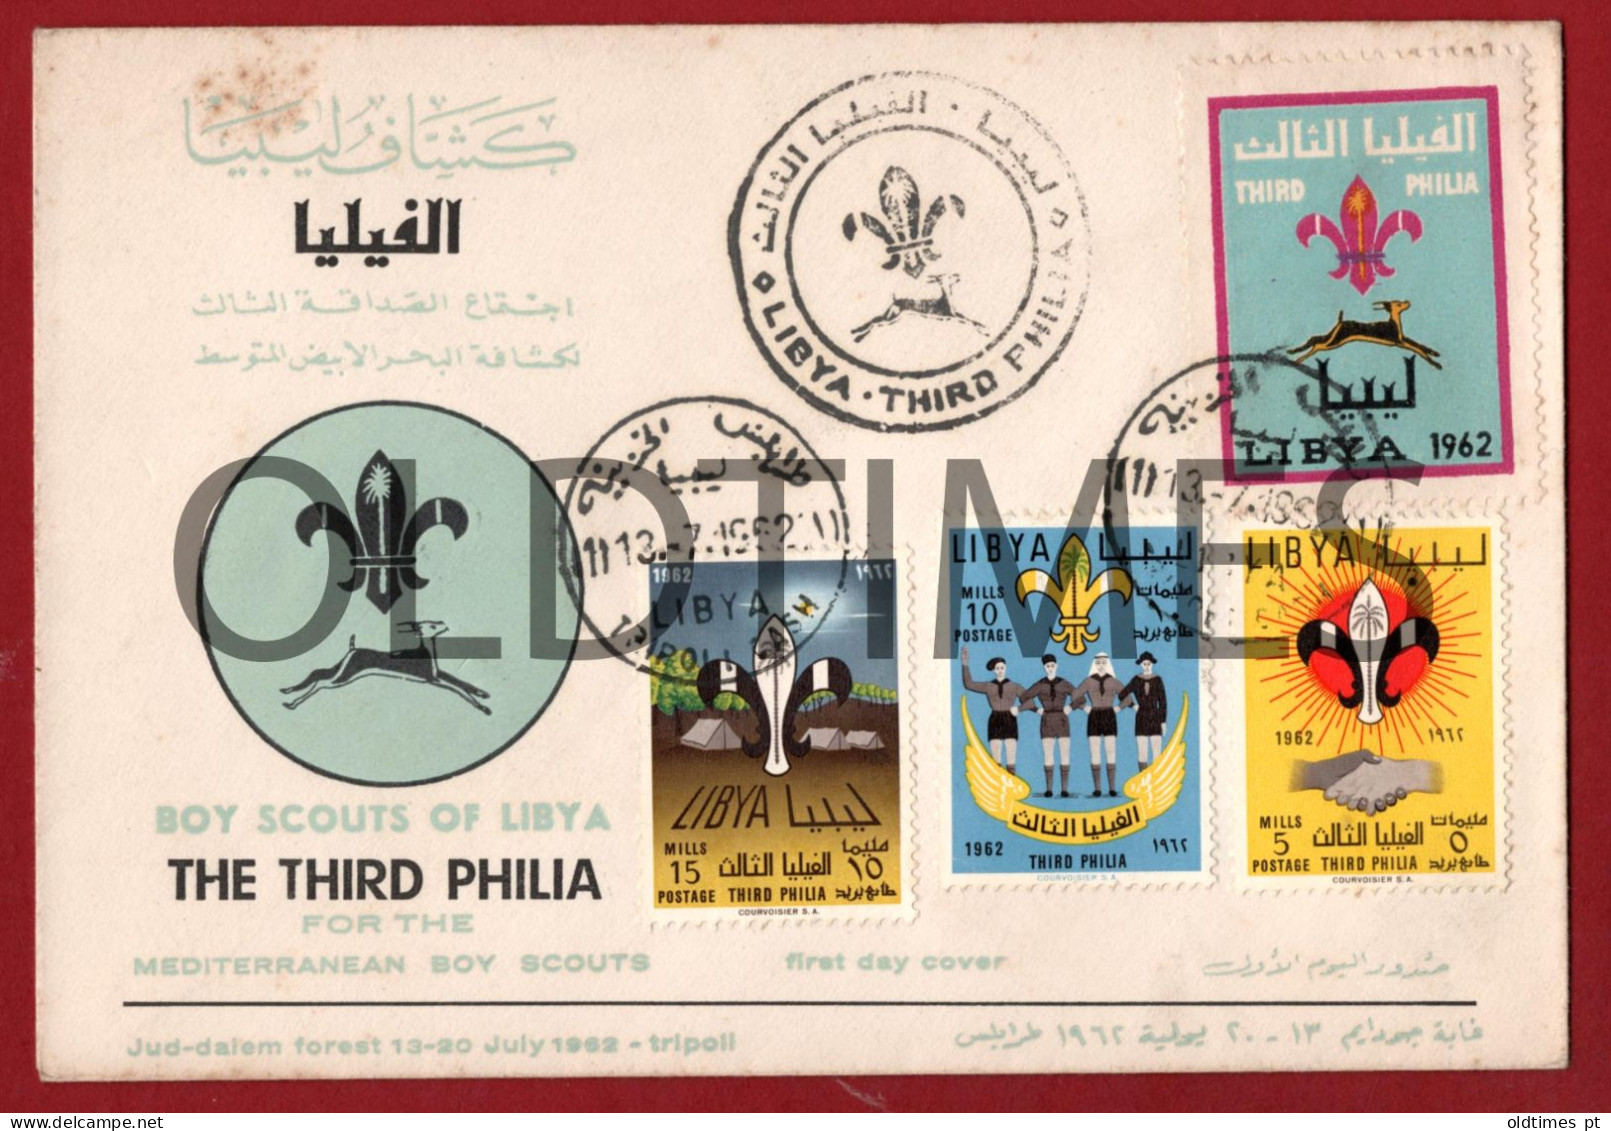 LIBYA - BOY SCOUTS OF LIBYA - THE THIRD PHILIA FOR THE MEDITERRANEAN - FIRST DAY COVER - 1962 ENVELOPE - Padvinderij